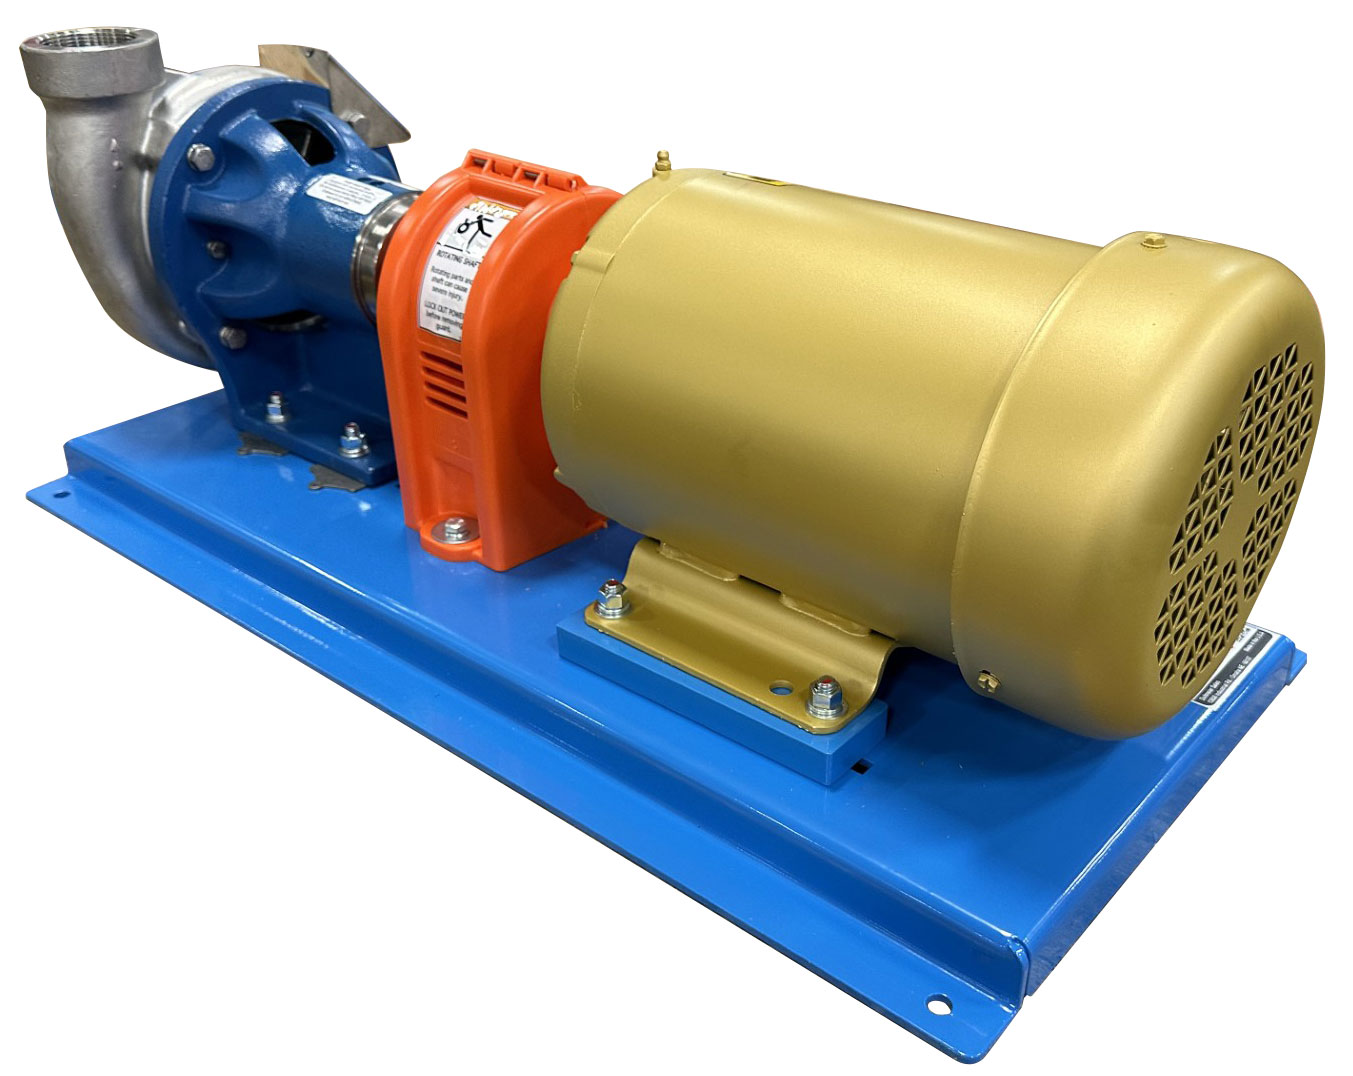 Picture of Centrifugal Pump, Motorpump 602S, 316SS, 2" x 2" FPT, 5 HP / 3PH, TEFC Type 230/460V, Max. Flow 150 GPM, 1.48 S.G. Rating (12.3lbs/gal) , Viton-Silicon